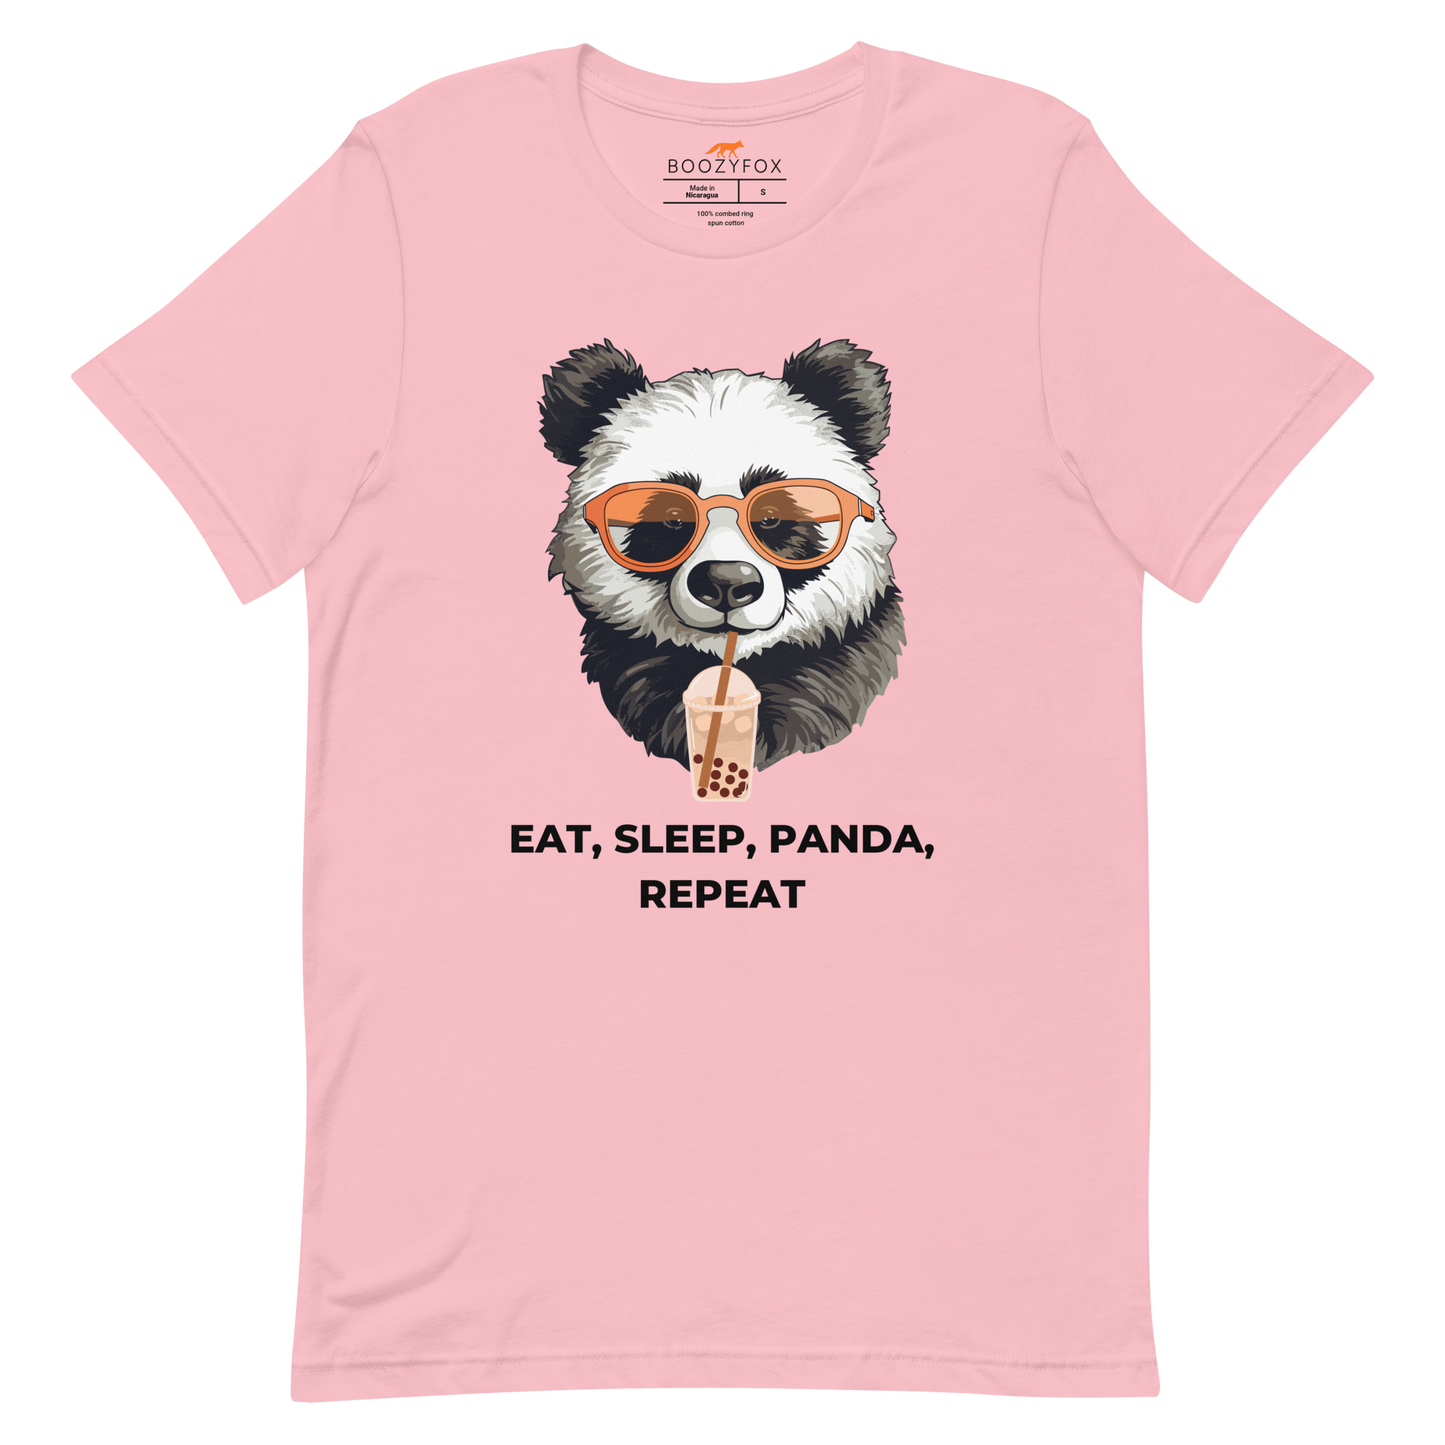 Pink Premium Panda Tee featuring an adorable Eat, Sleep, Panda, Repeat graphic on the chest - Funny Graphic Panda Tees - Boozy Fox